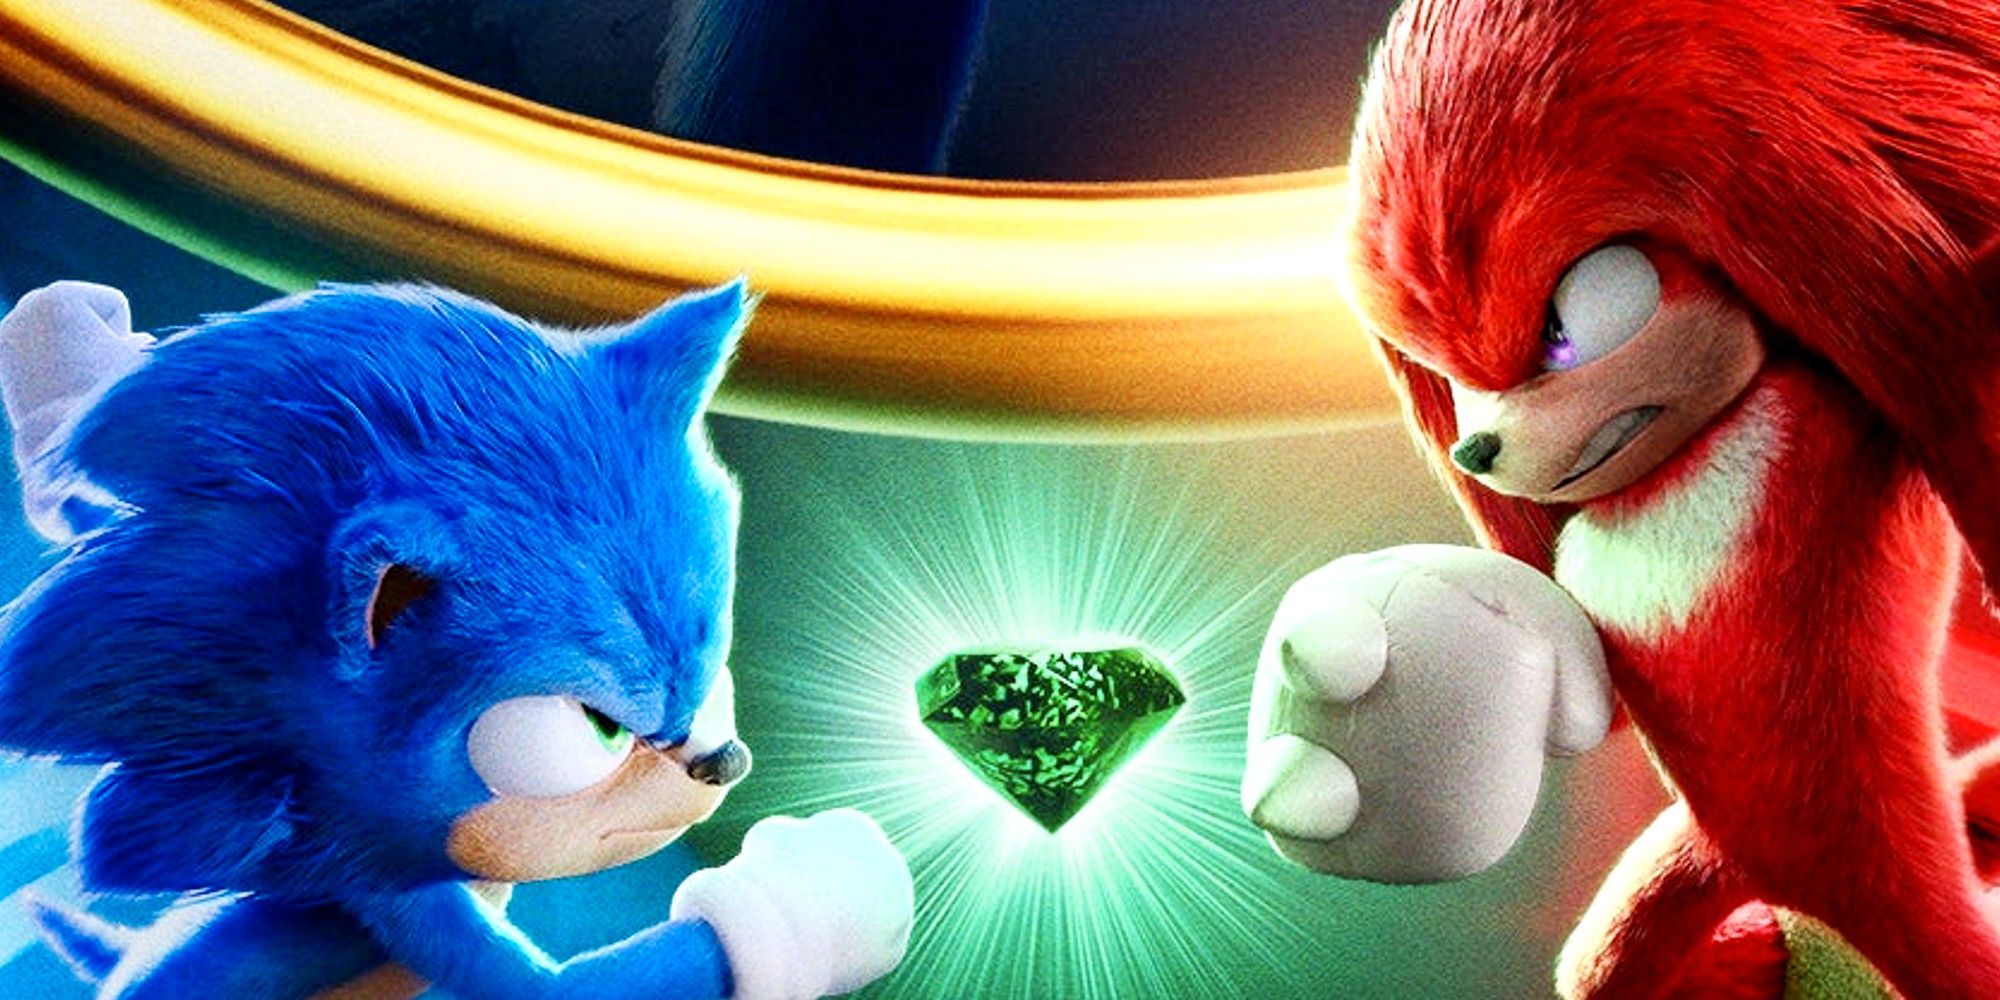 Sonic The Hedgehog 2 Poster Teases Clash Over The Chaos Emerald